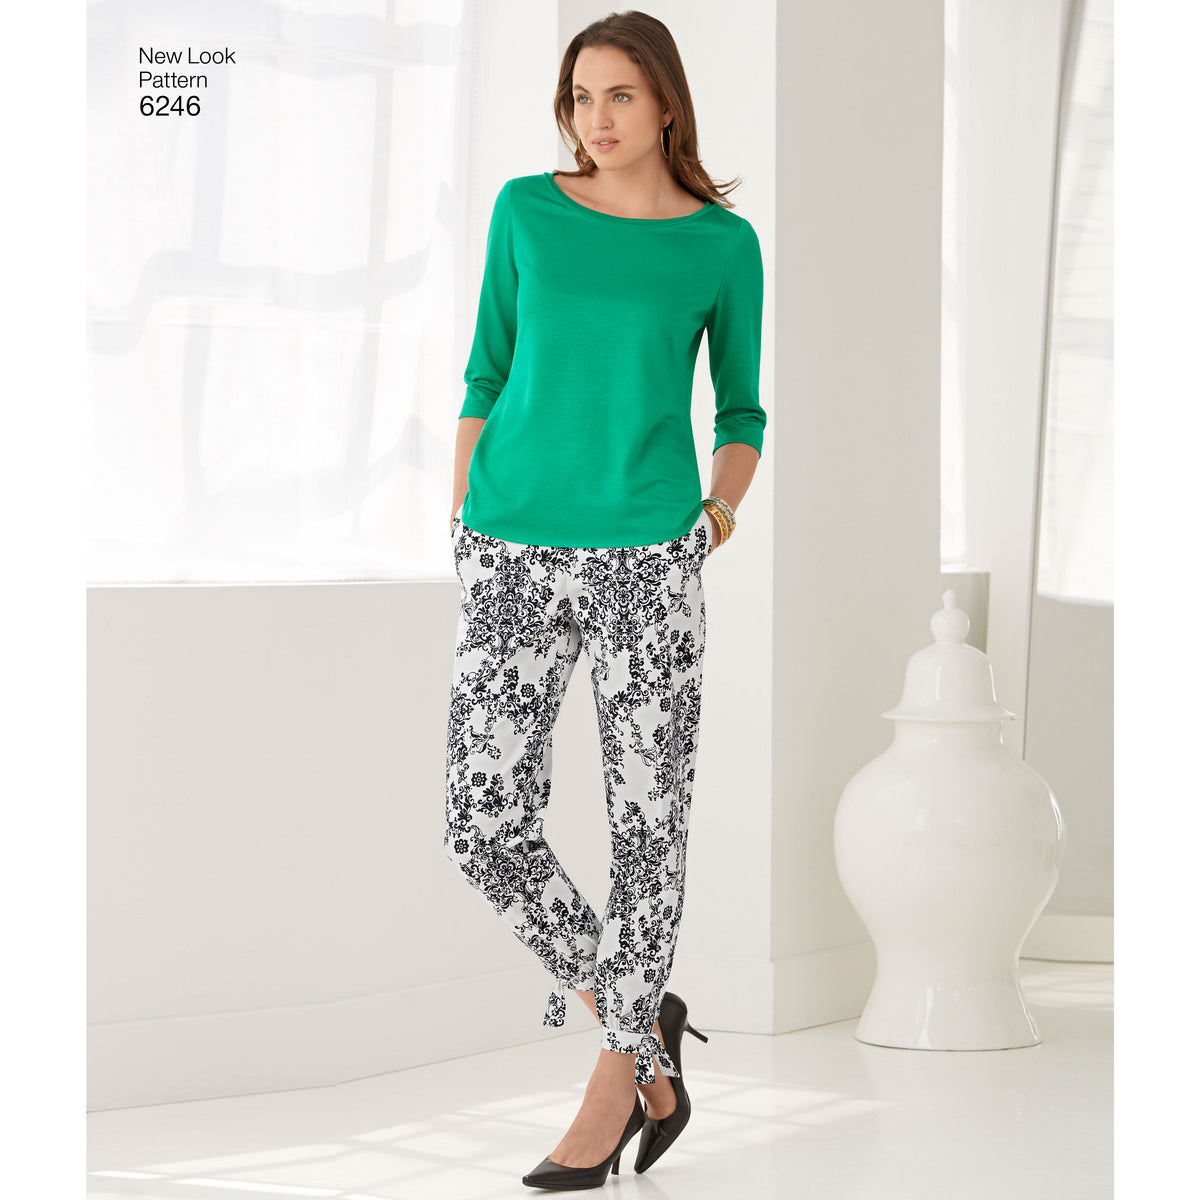 6246 Misses' Tapered Ankle Pant and Knit Top